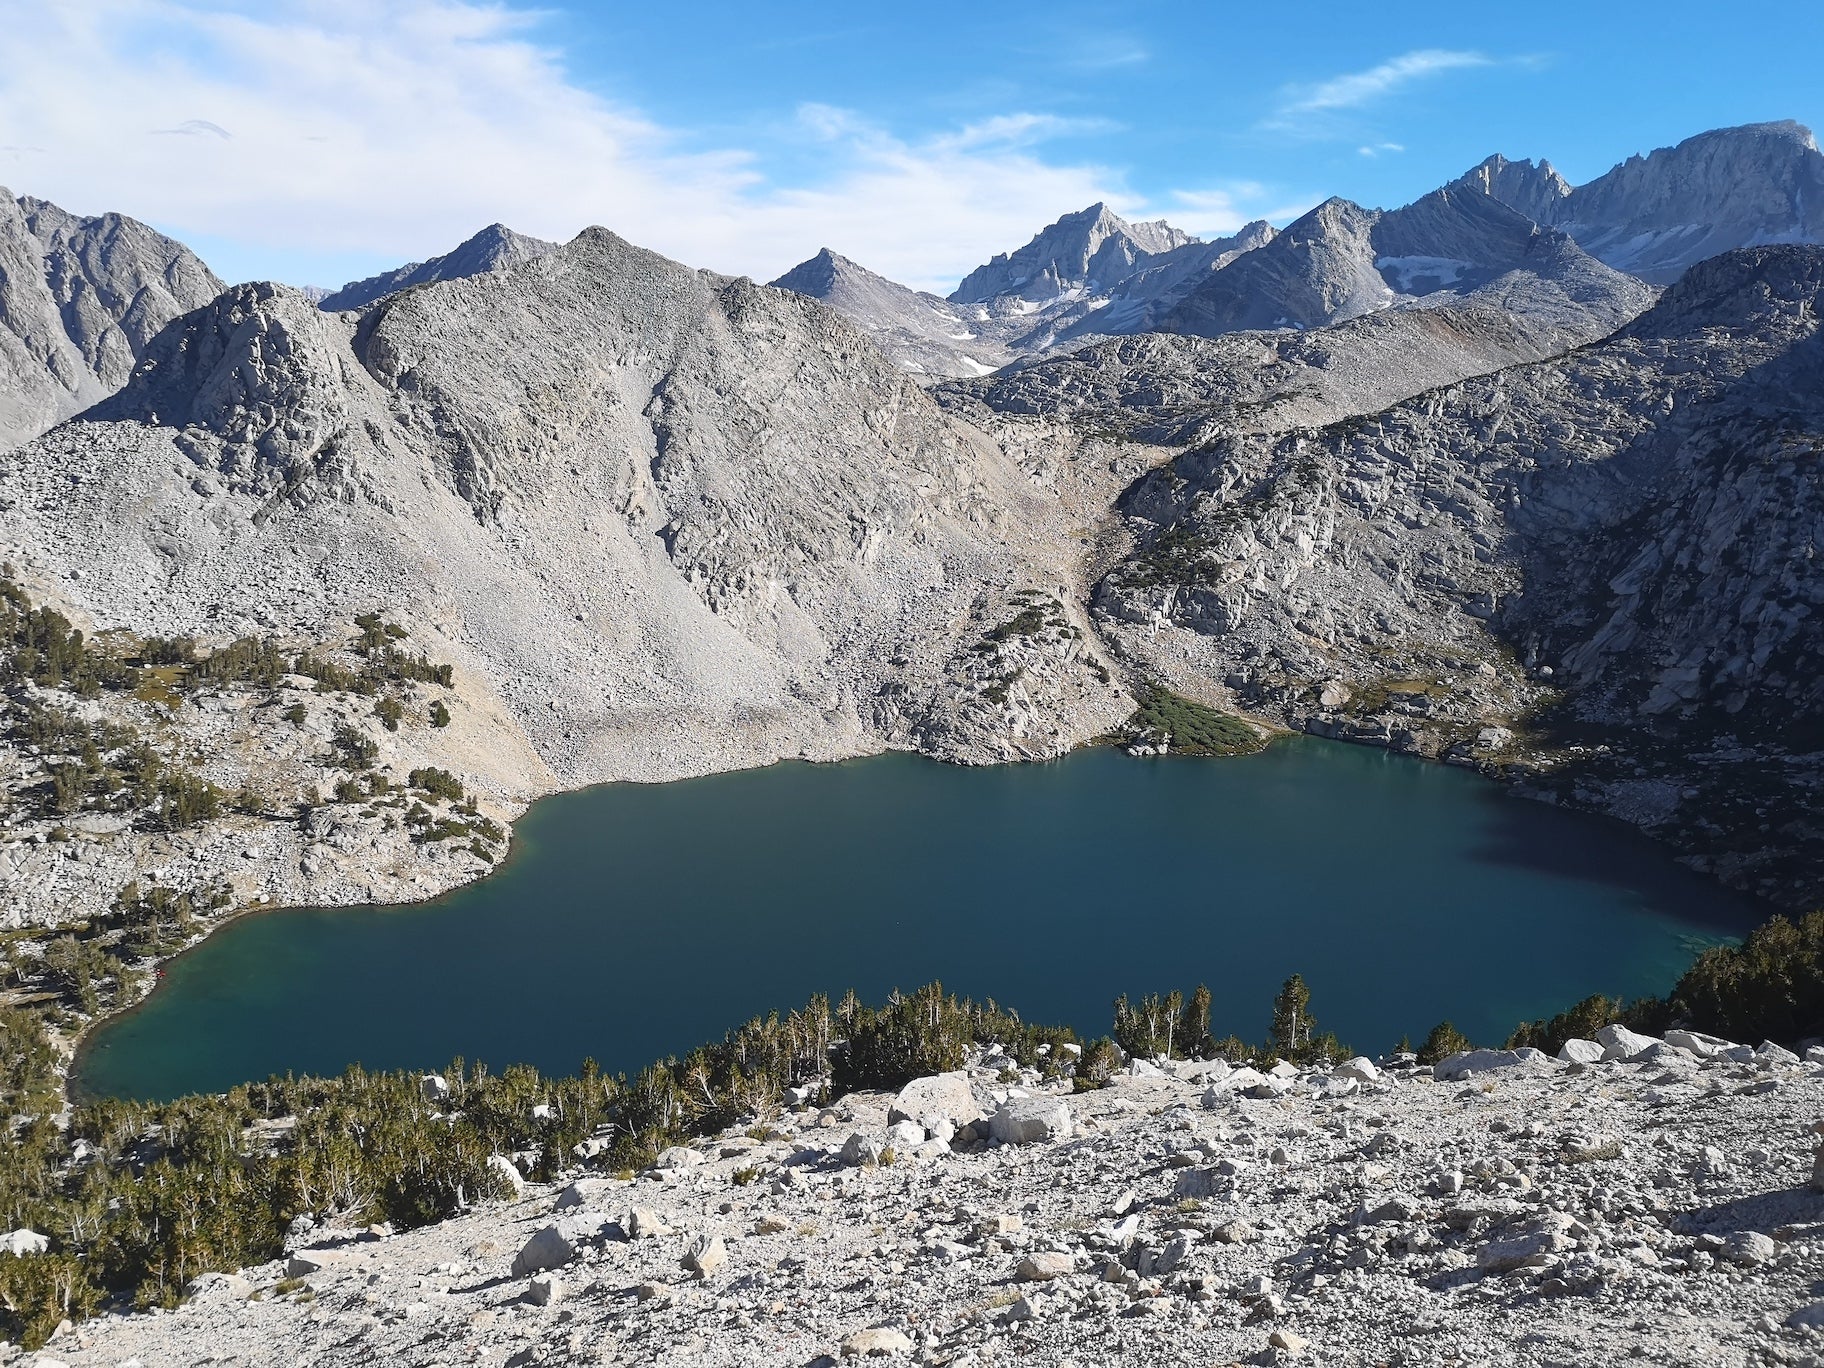 A small alpine lake surrounded by gray mountains in the Sierra Nevada of California